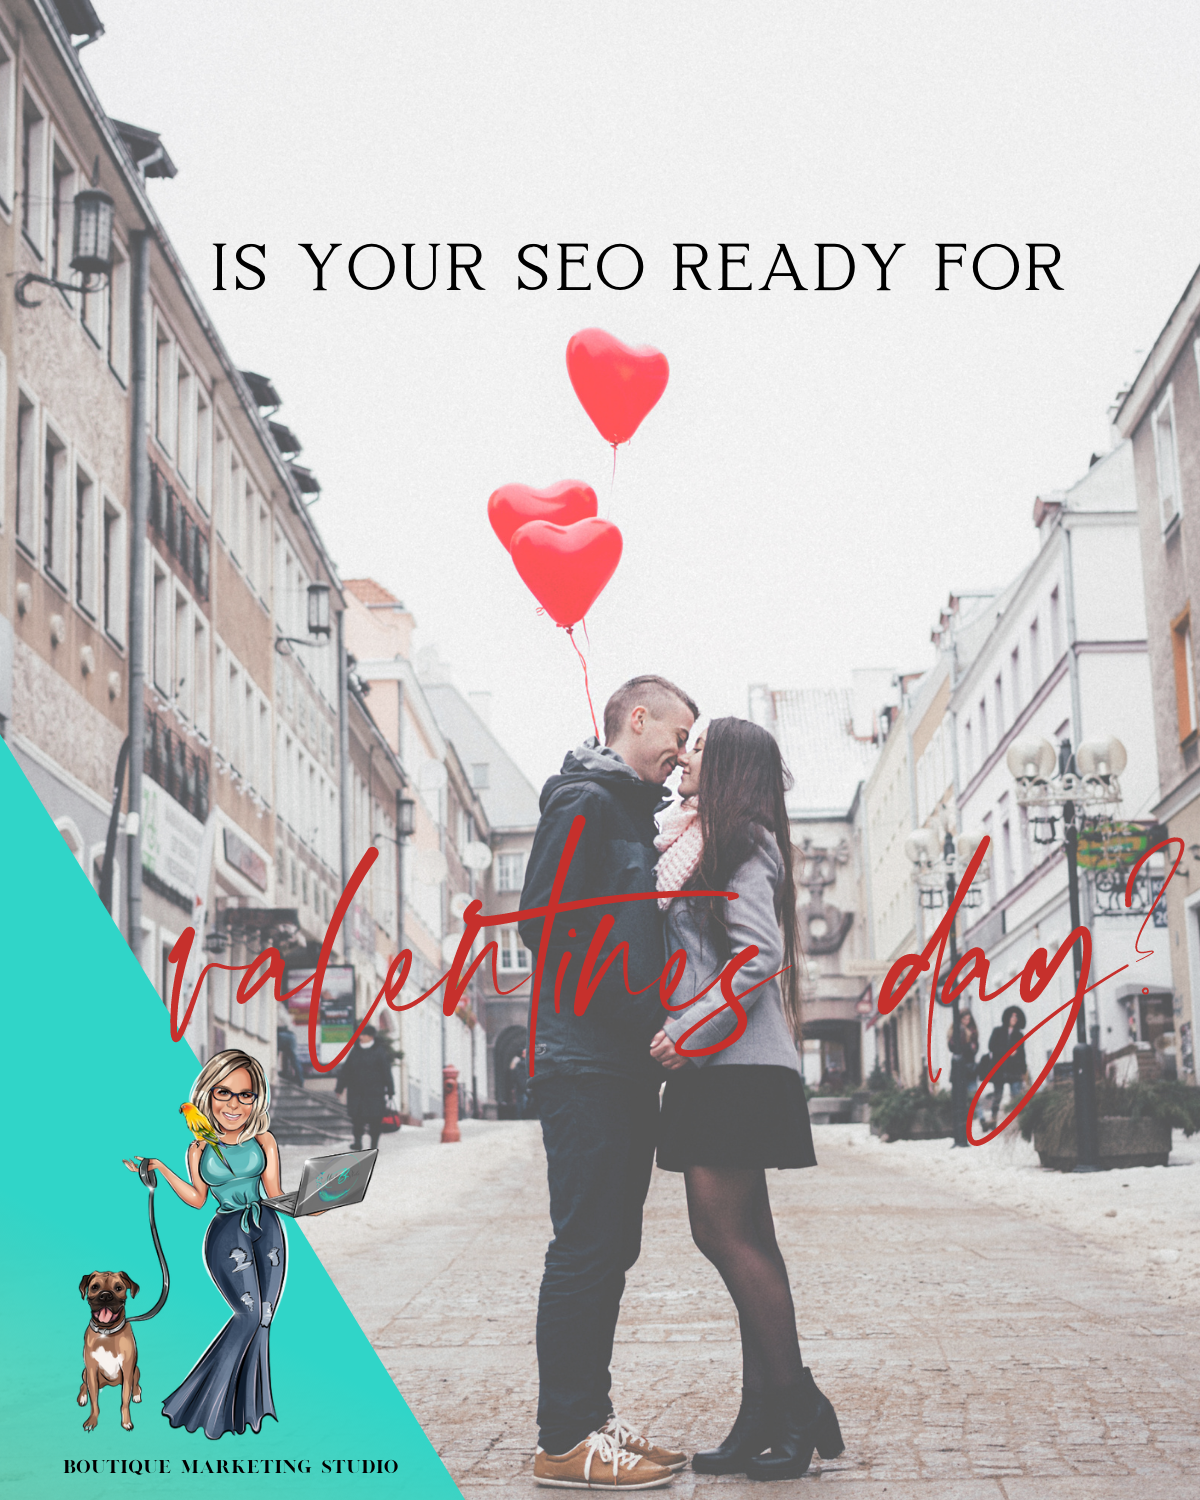 Is your SEO ready for Valentines Day?